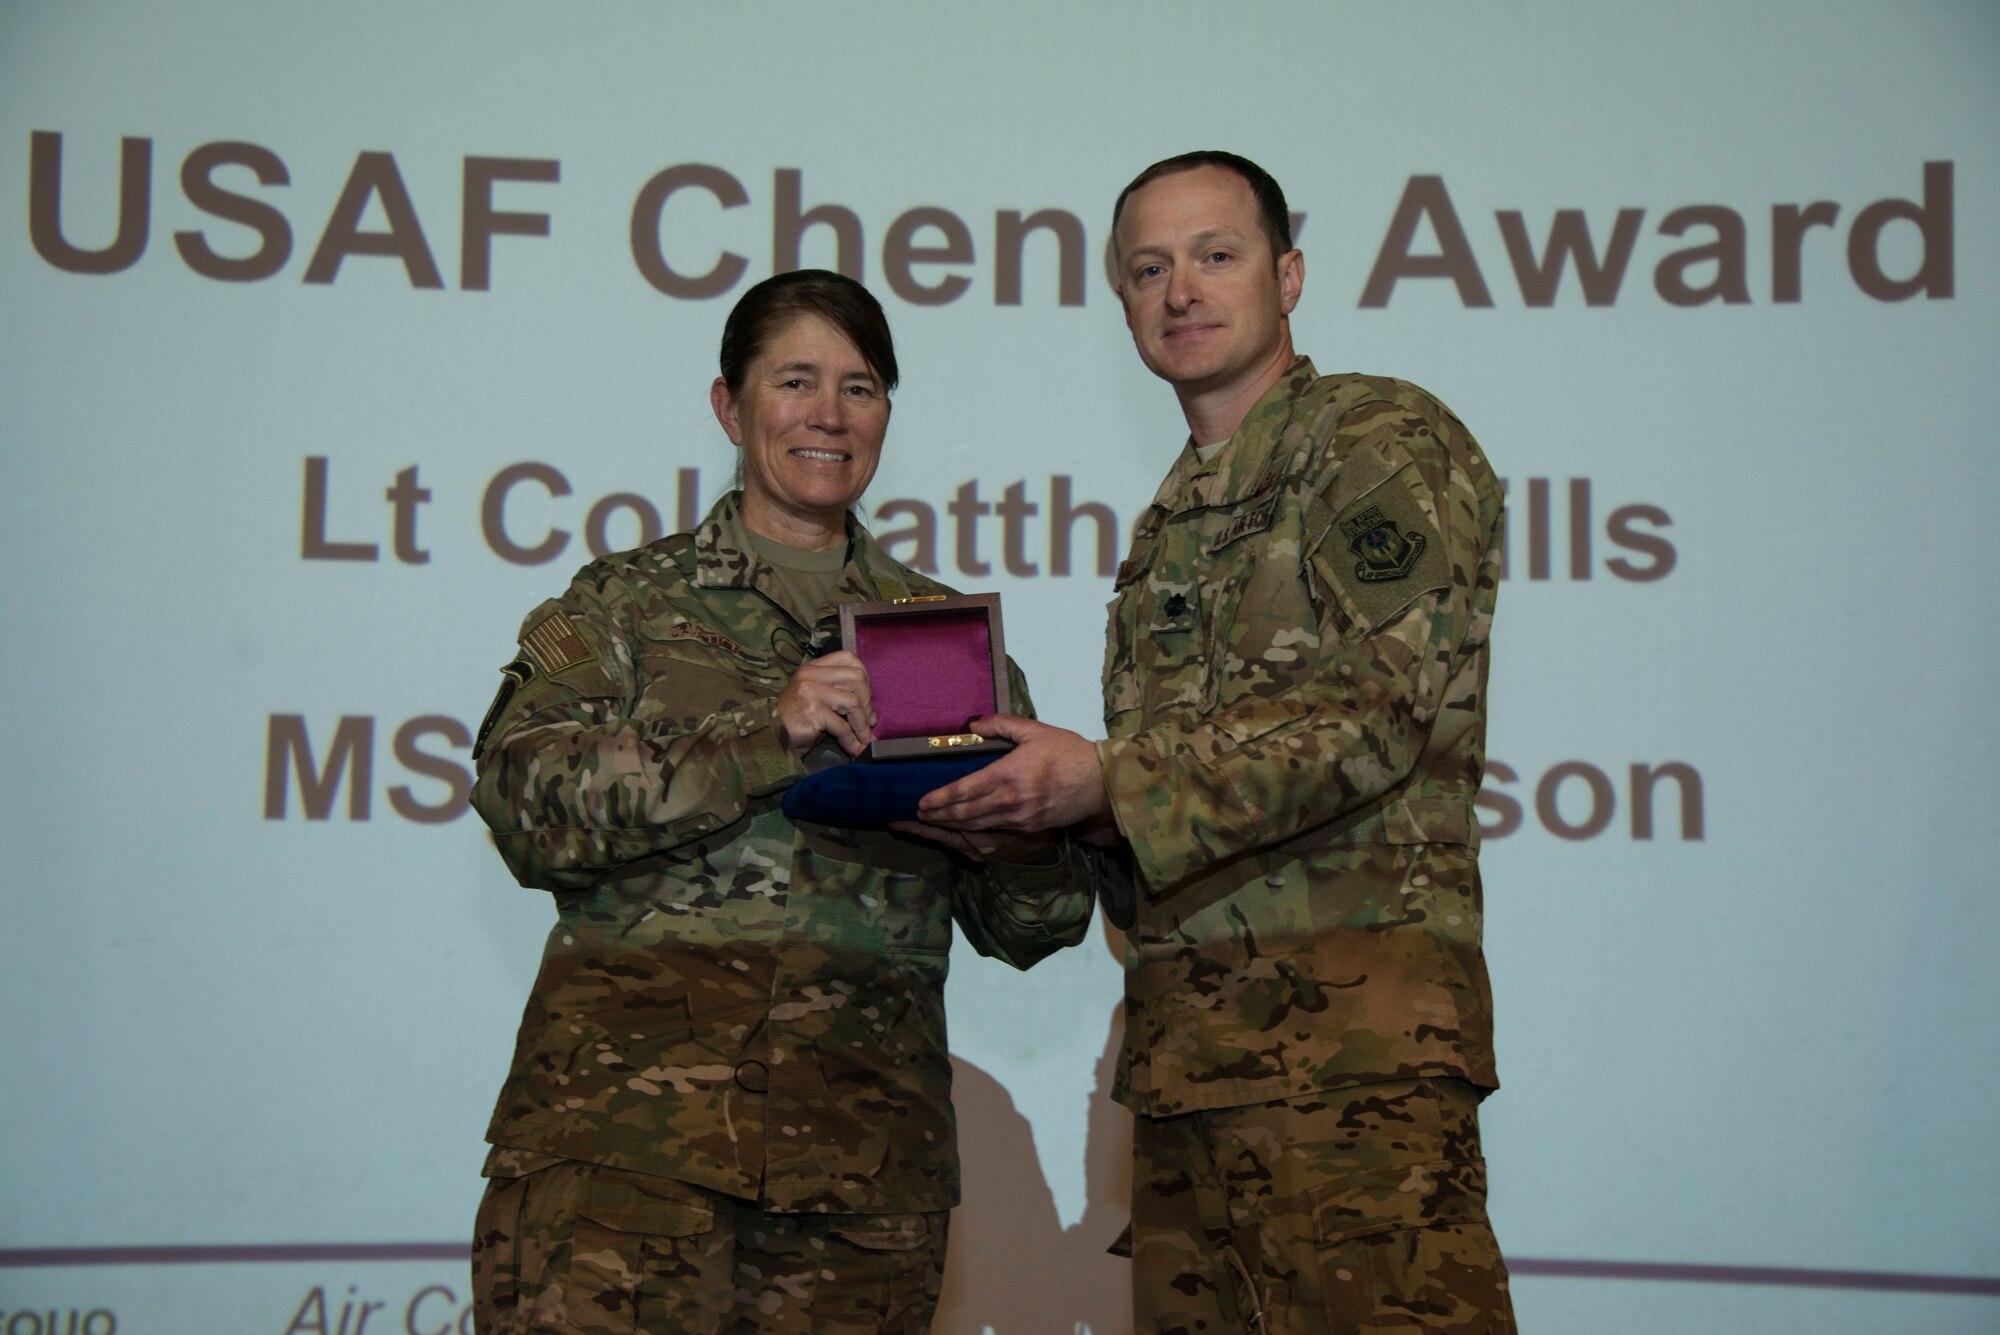 Two people holding an award in front of a screen.